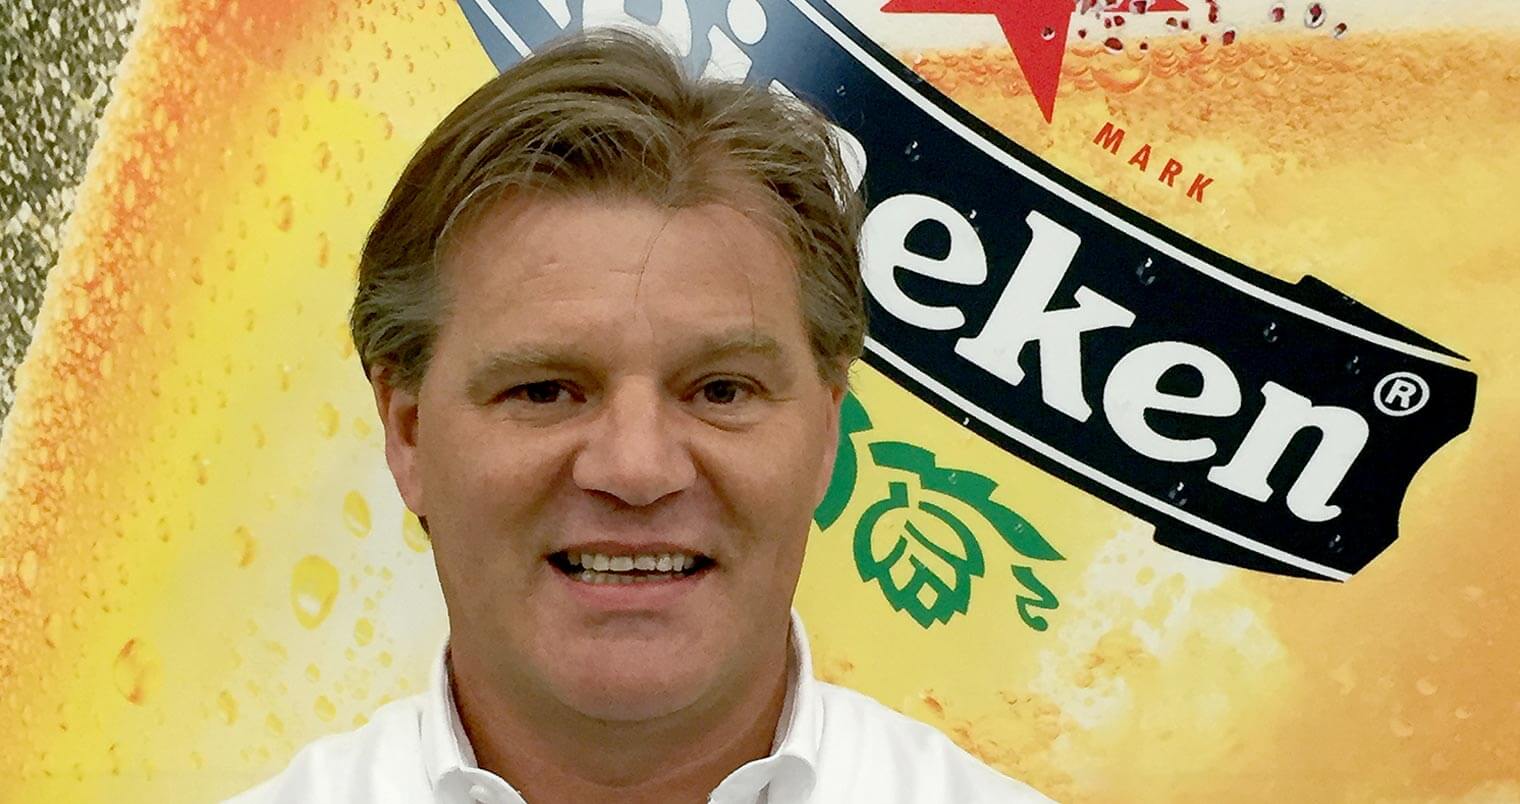 Meet Peter Camps, On Premise Channel Strategy & Shopper Marketing Manager, Heineken BrewLock, featured image